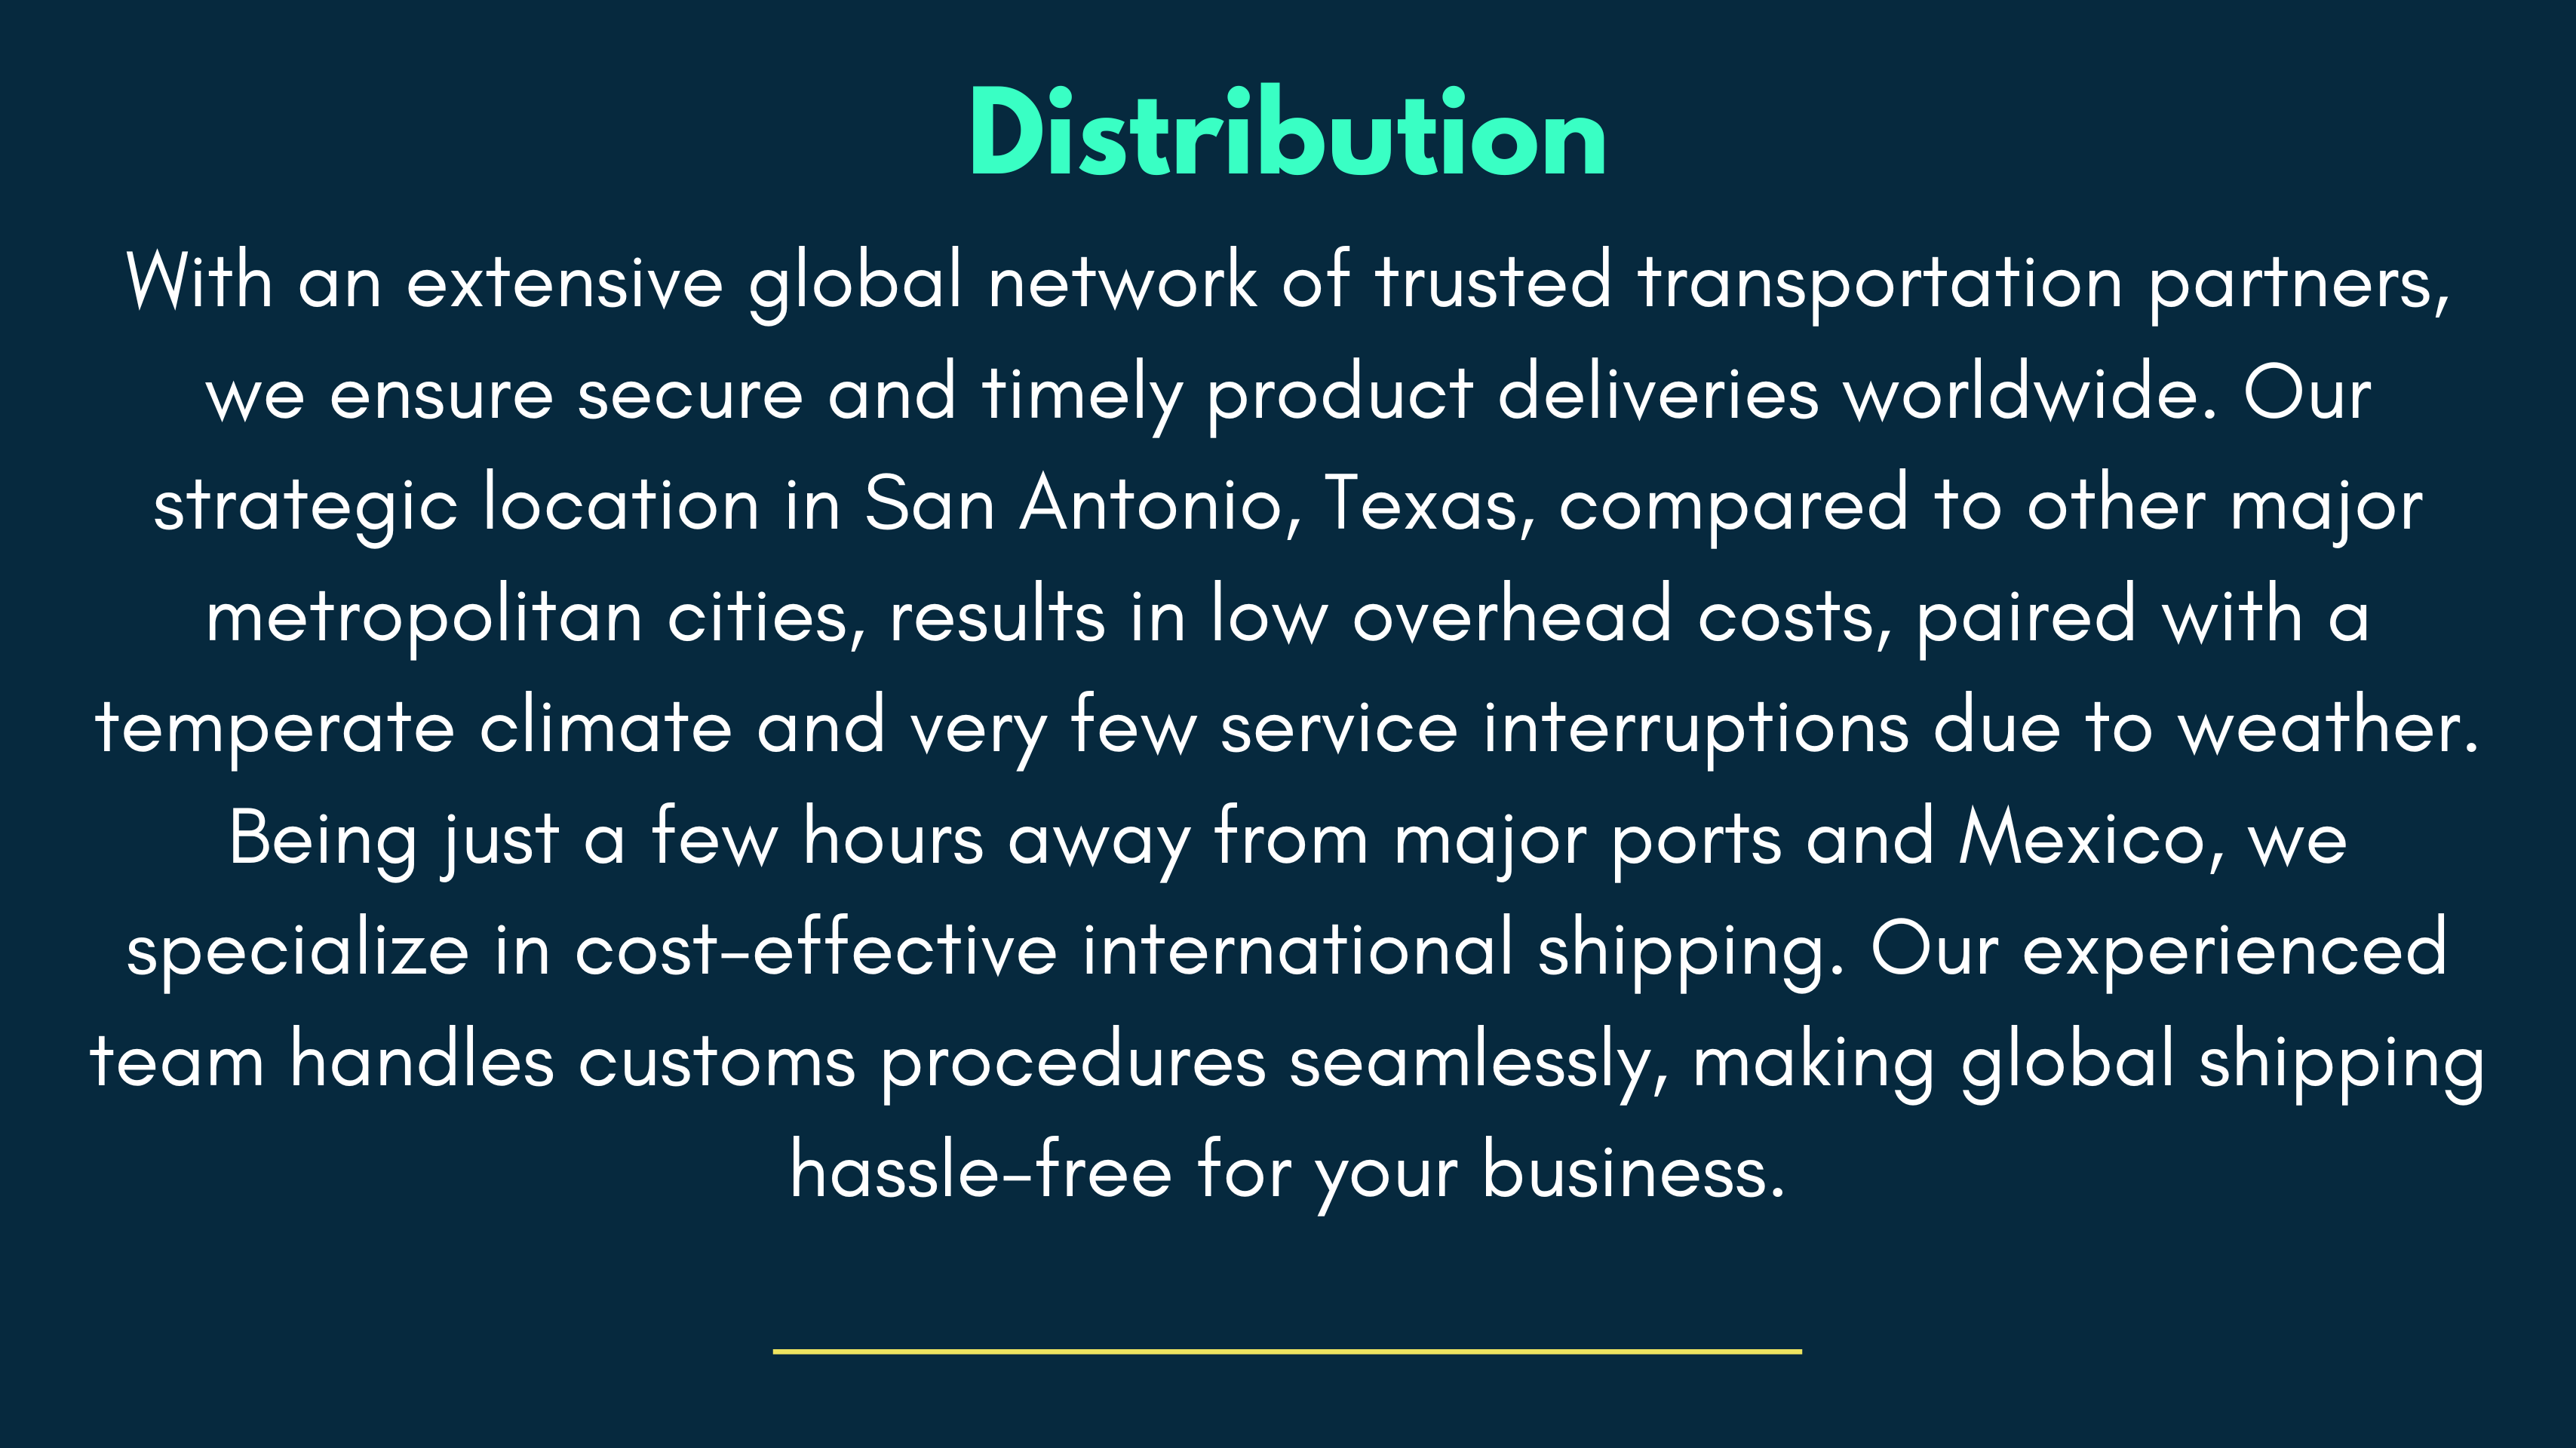 Our Distribution Service